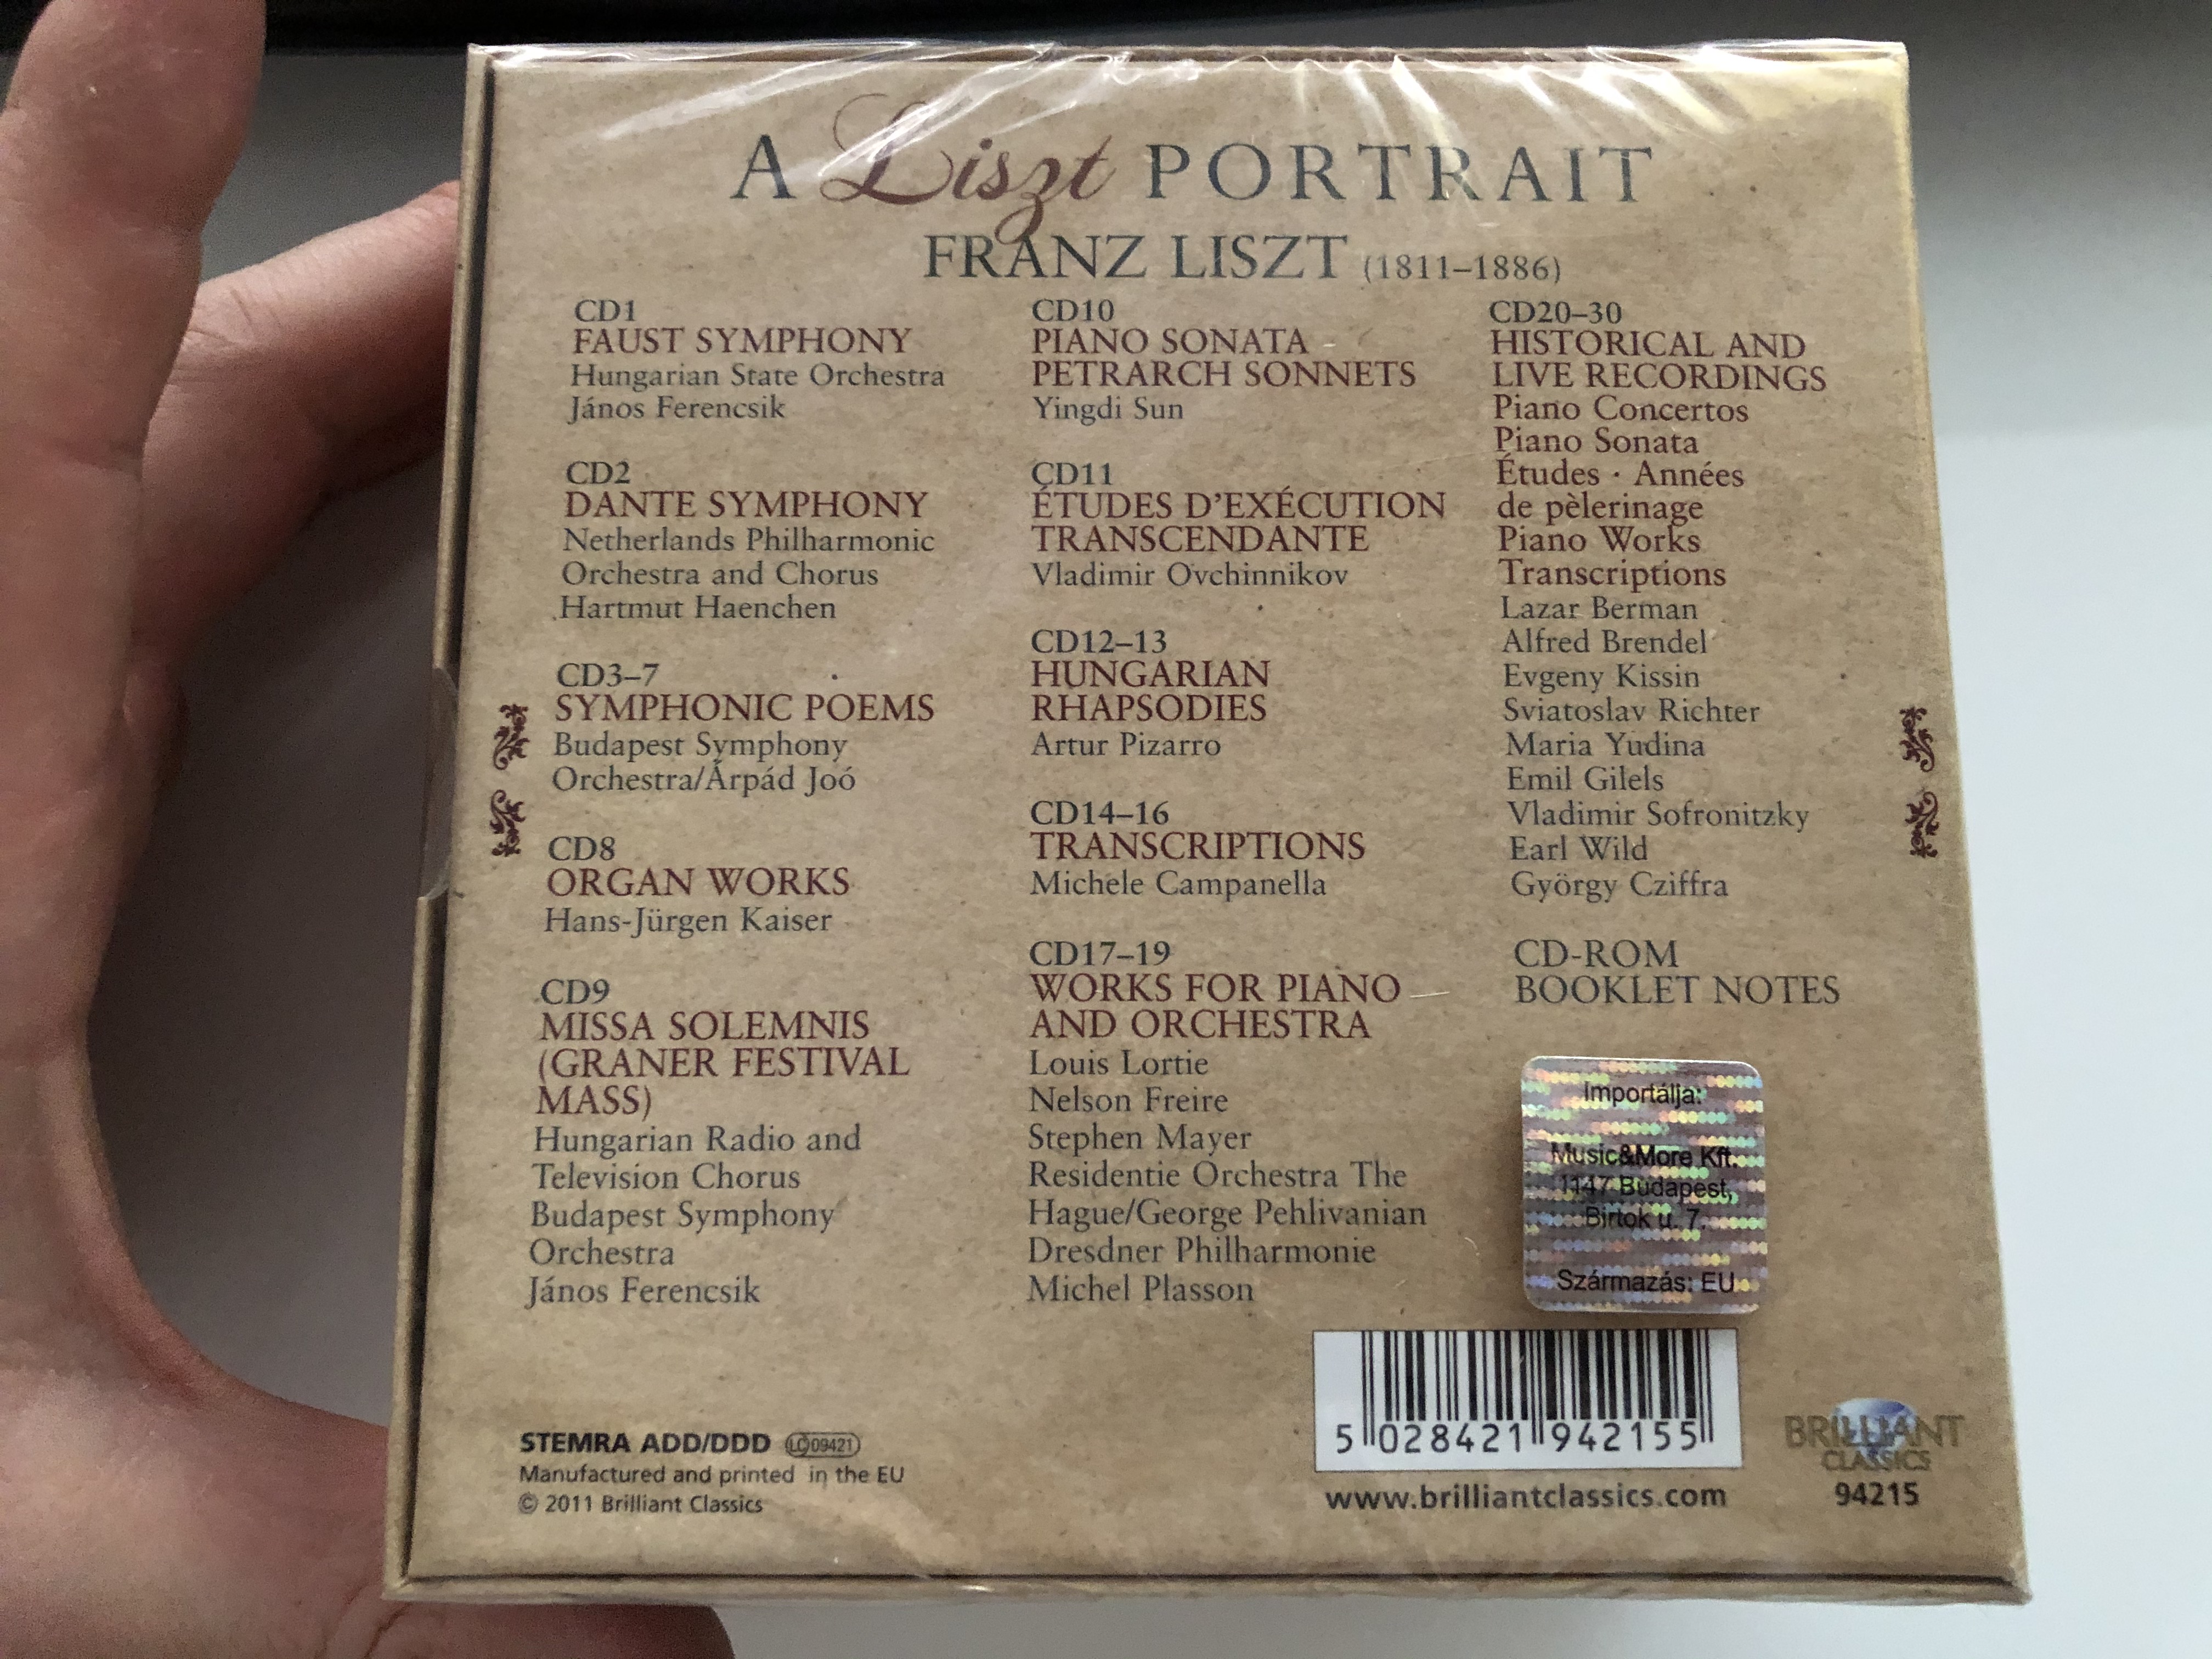 a-liszt-portrait-contains-the-essential-works-faust-and-dante-symphonies-complete-symphonic-poems-complete-works-for-piano-and-orchestra-a-wealth-of-piano-music-brilliant-classics-30x-a-3-.jpg